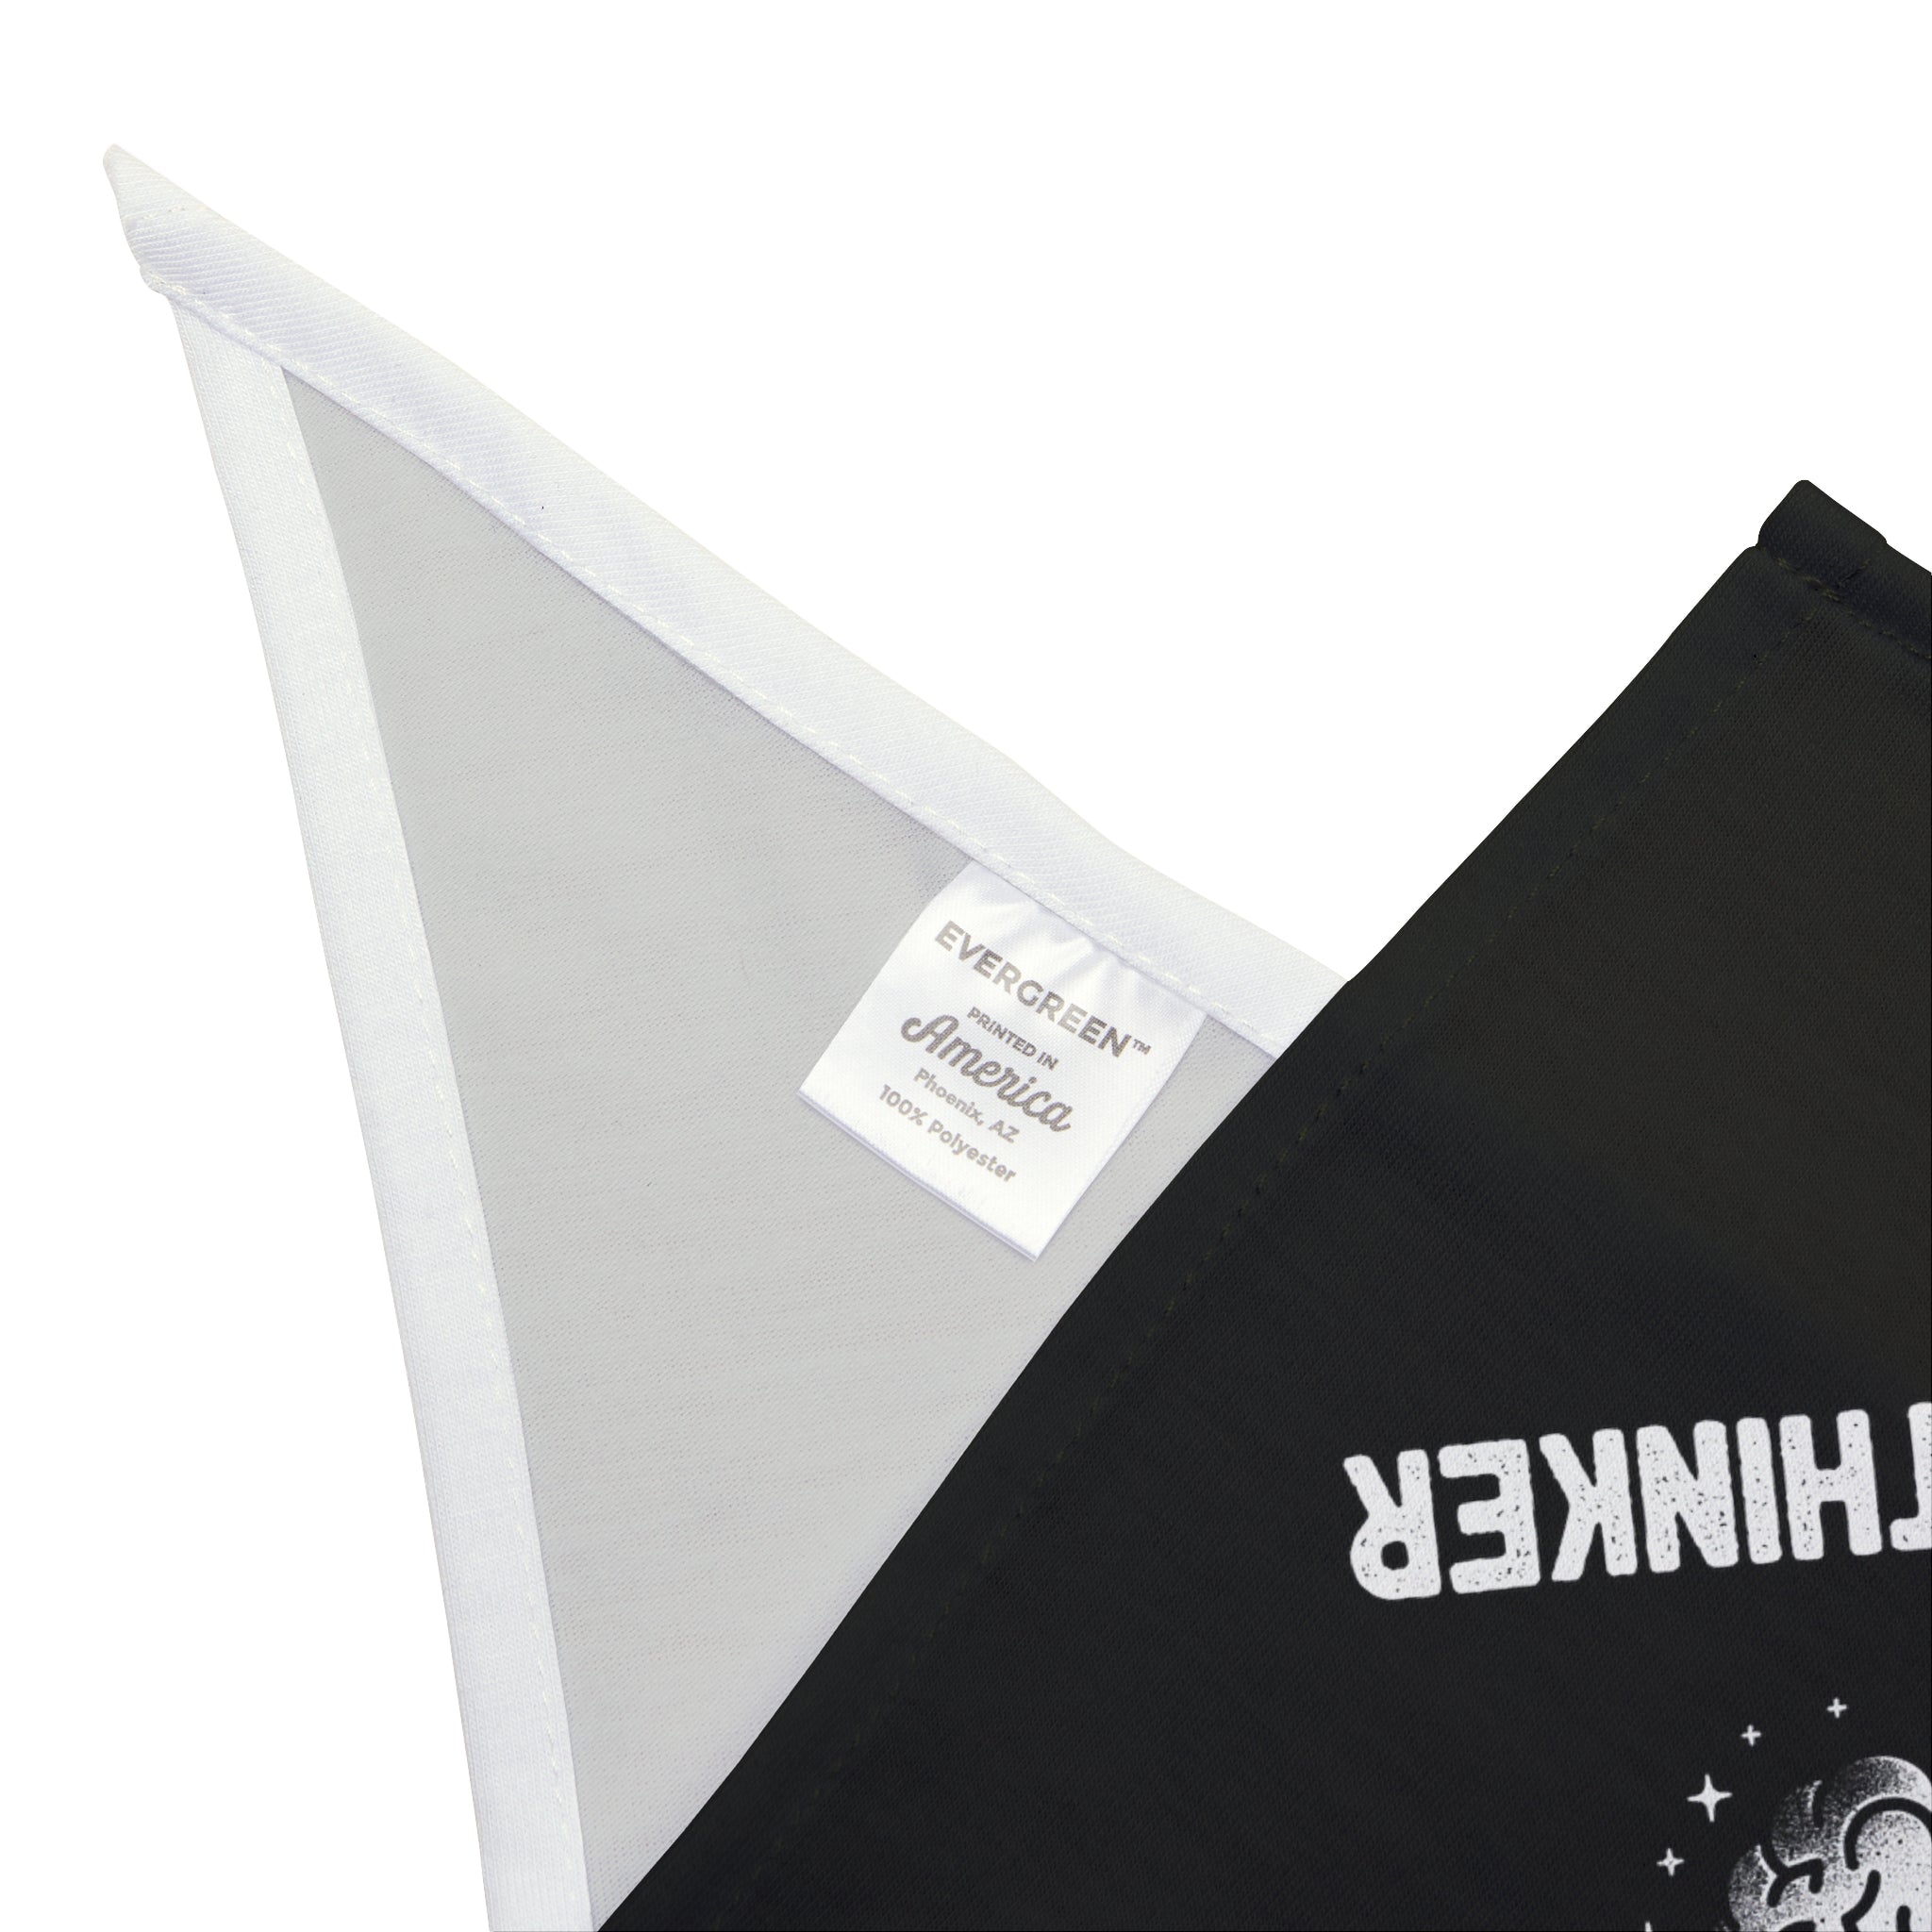 Close-up of a black fabric with white triangular sections, made from soft-spun polyester, and a tag that reads "Evergreen America." The word "SHINE," part of the Professional Overthinker - Pet Bandana collection for the conscious pet owner, is partially visible on the fabric.